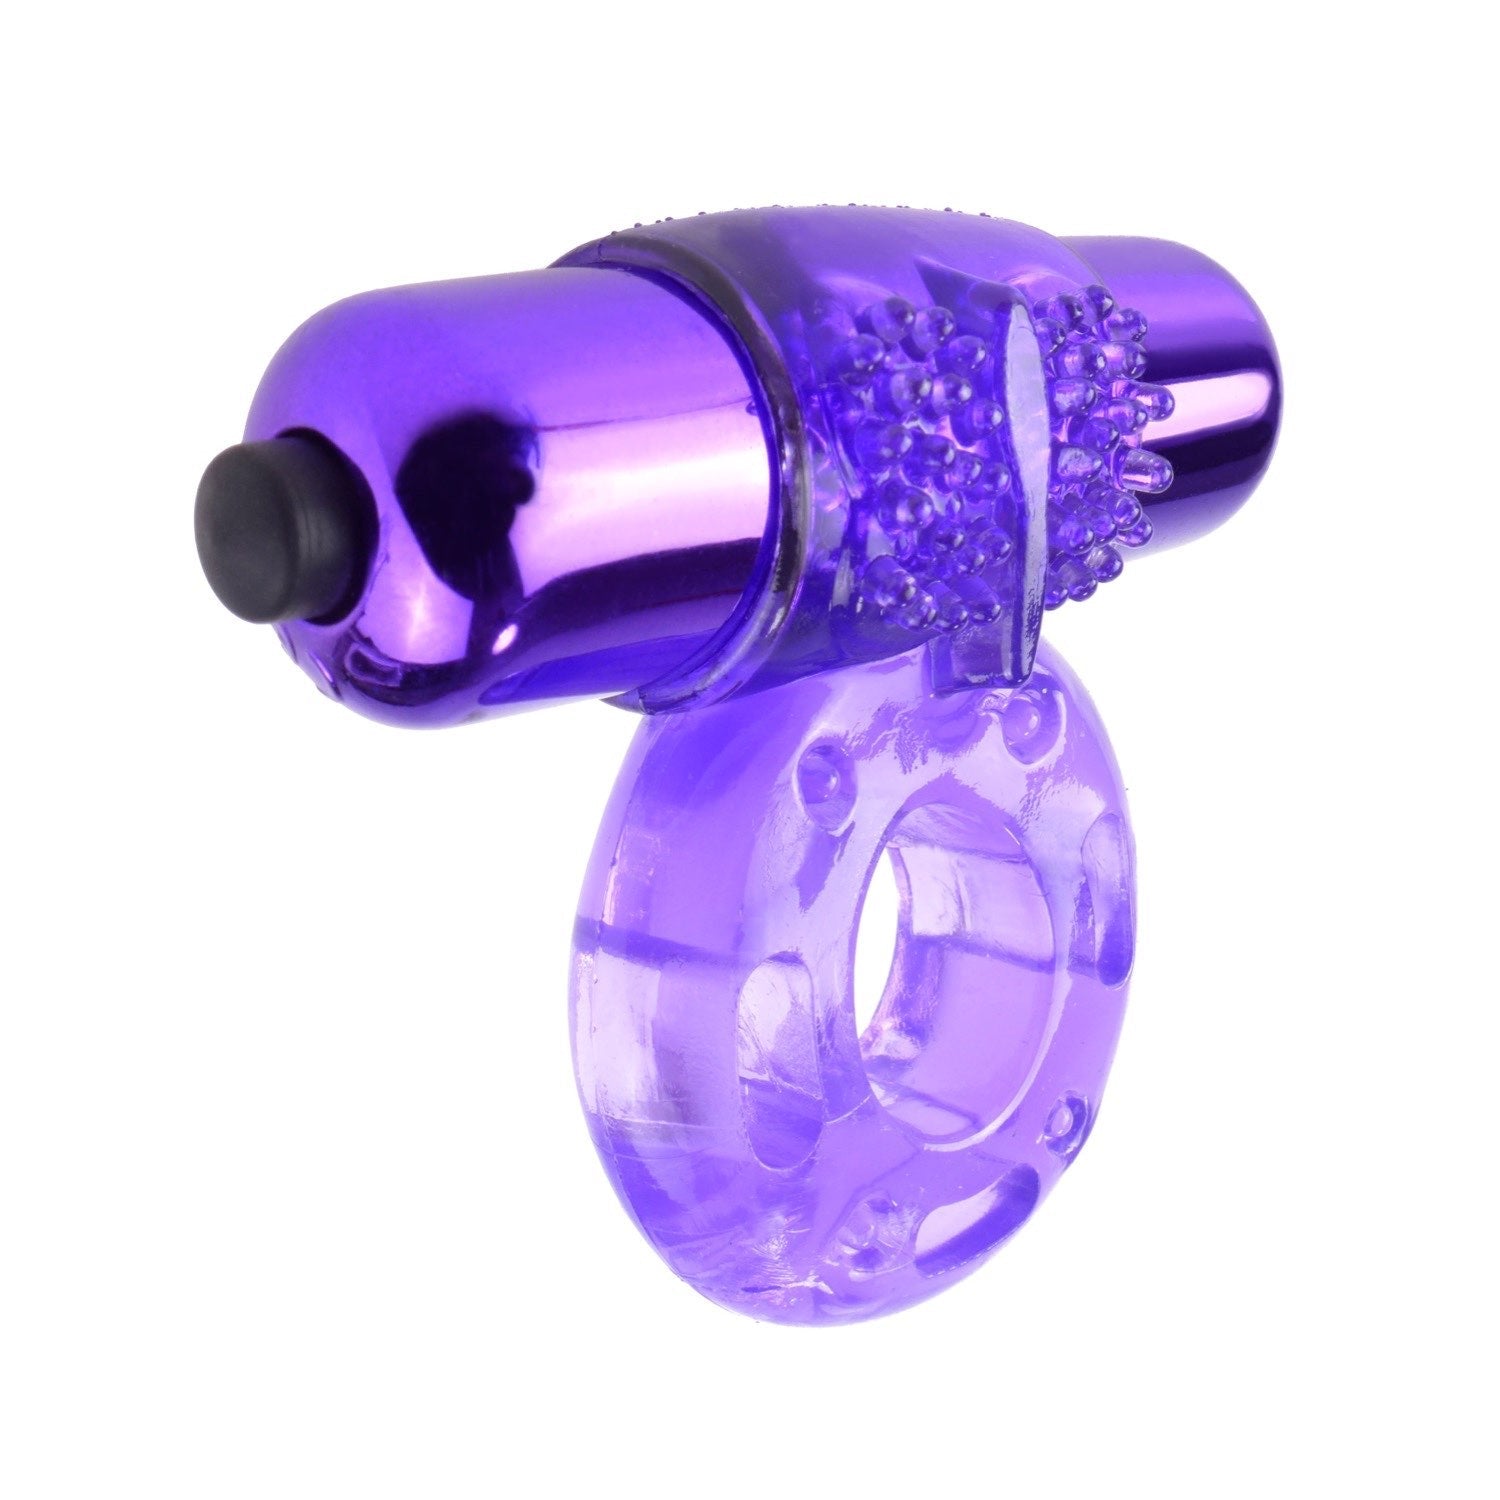 Fantasy C-Ringz Vibrating Super Ring - Purple Vibrating Cock Ring by Pipedream